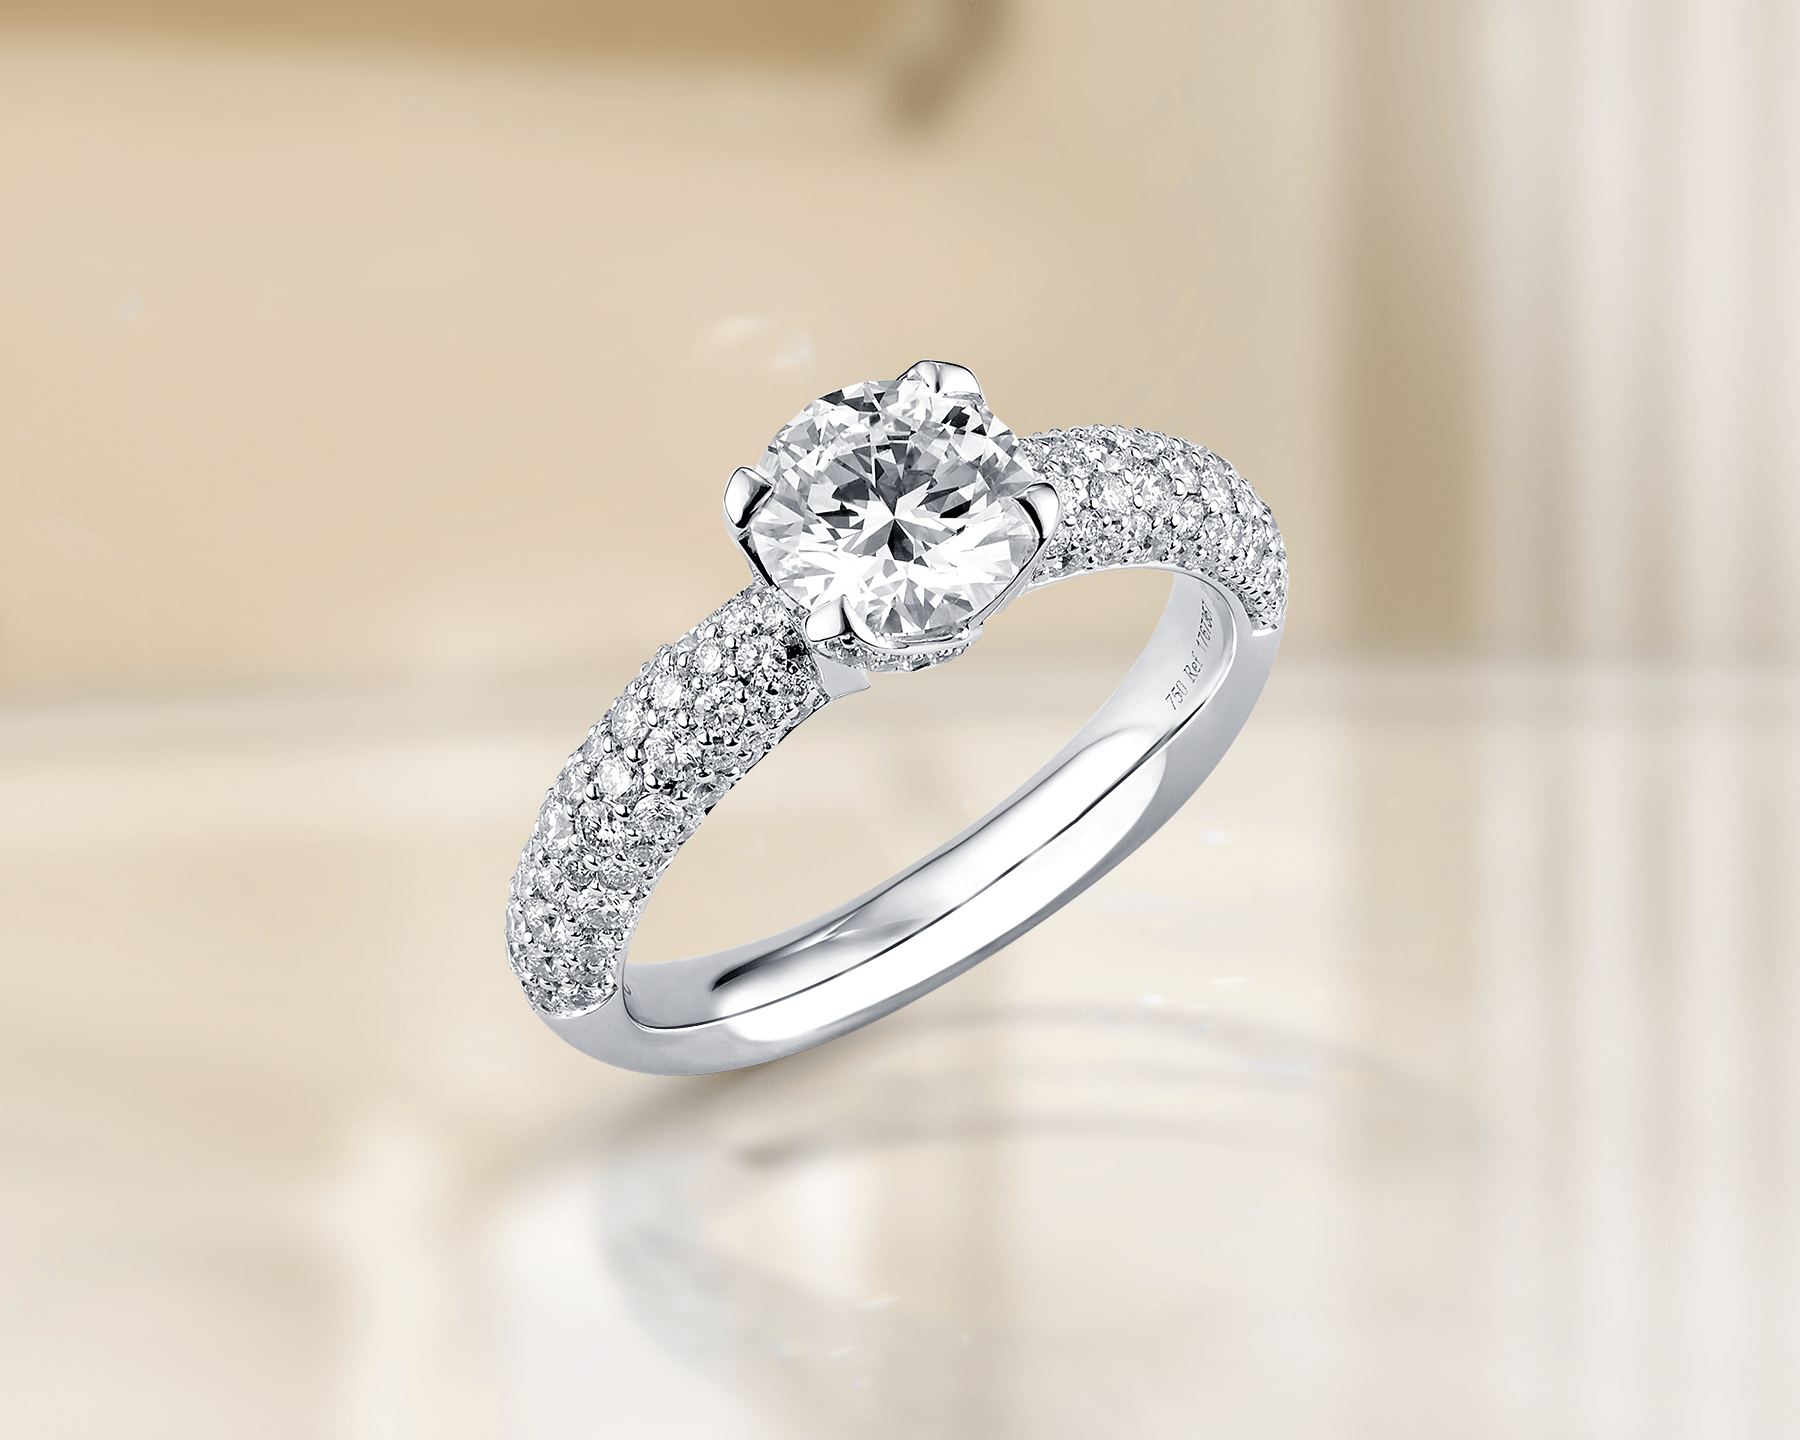 When Is the Best Time To Buy Wedding Rings?